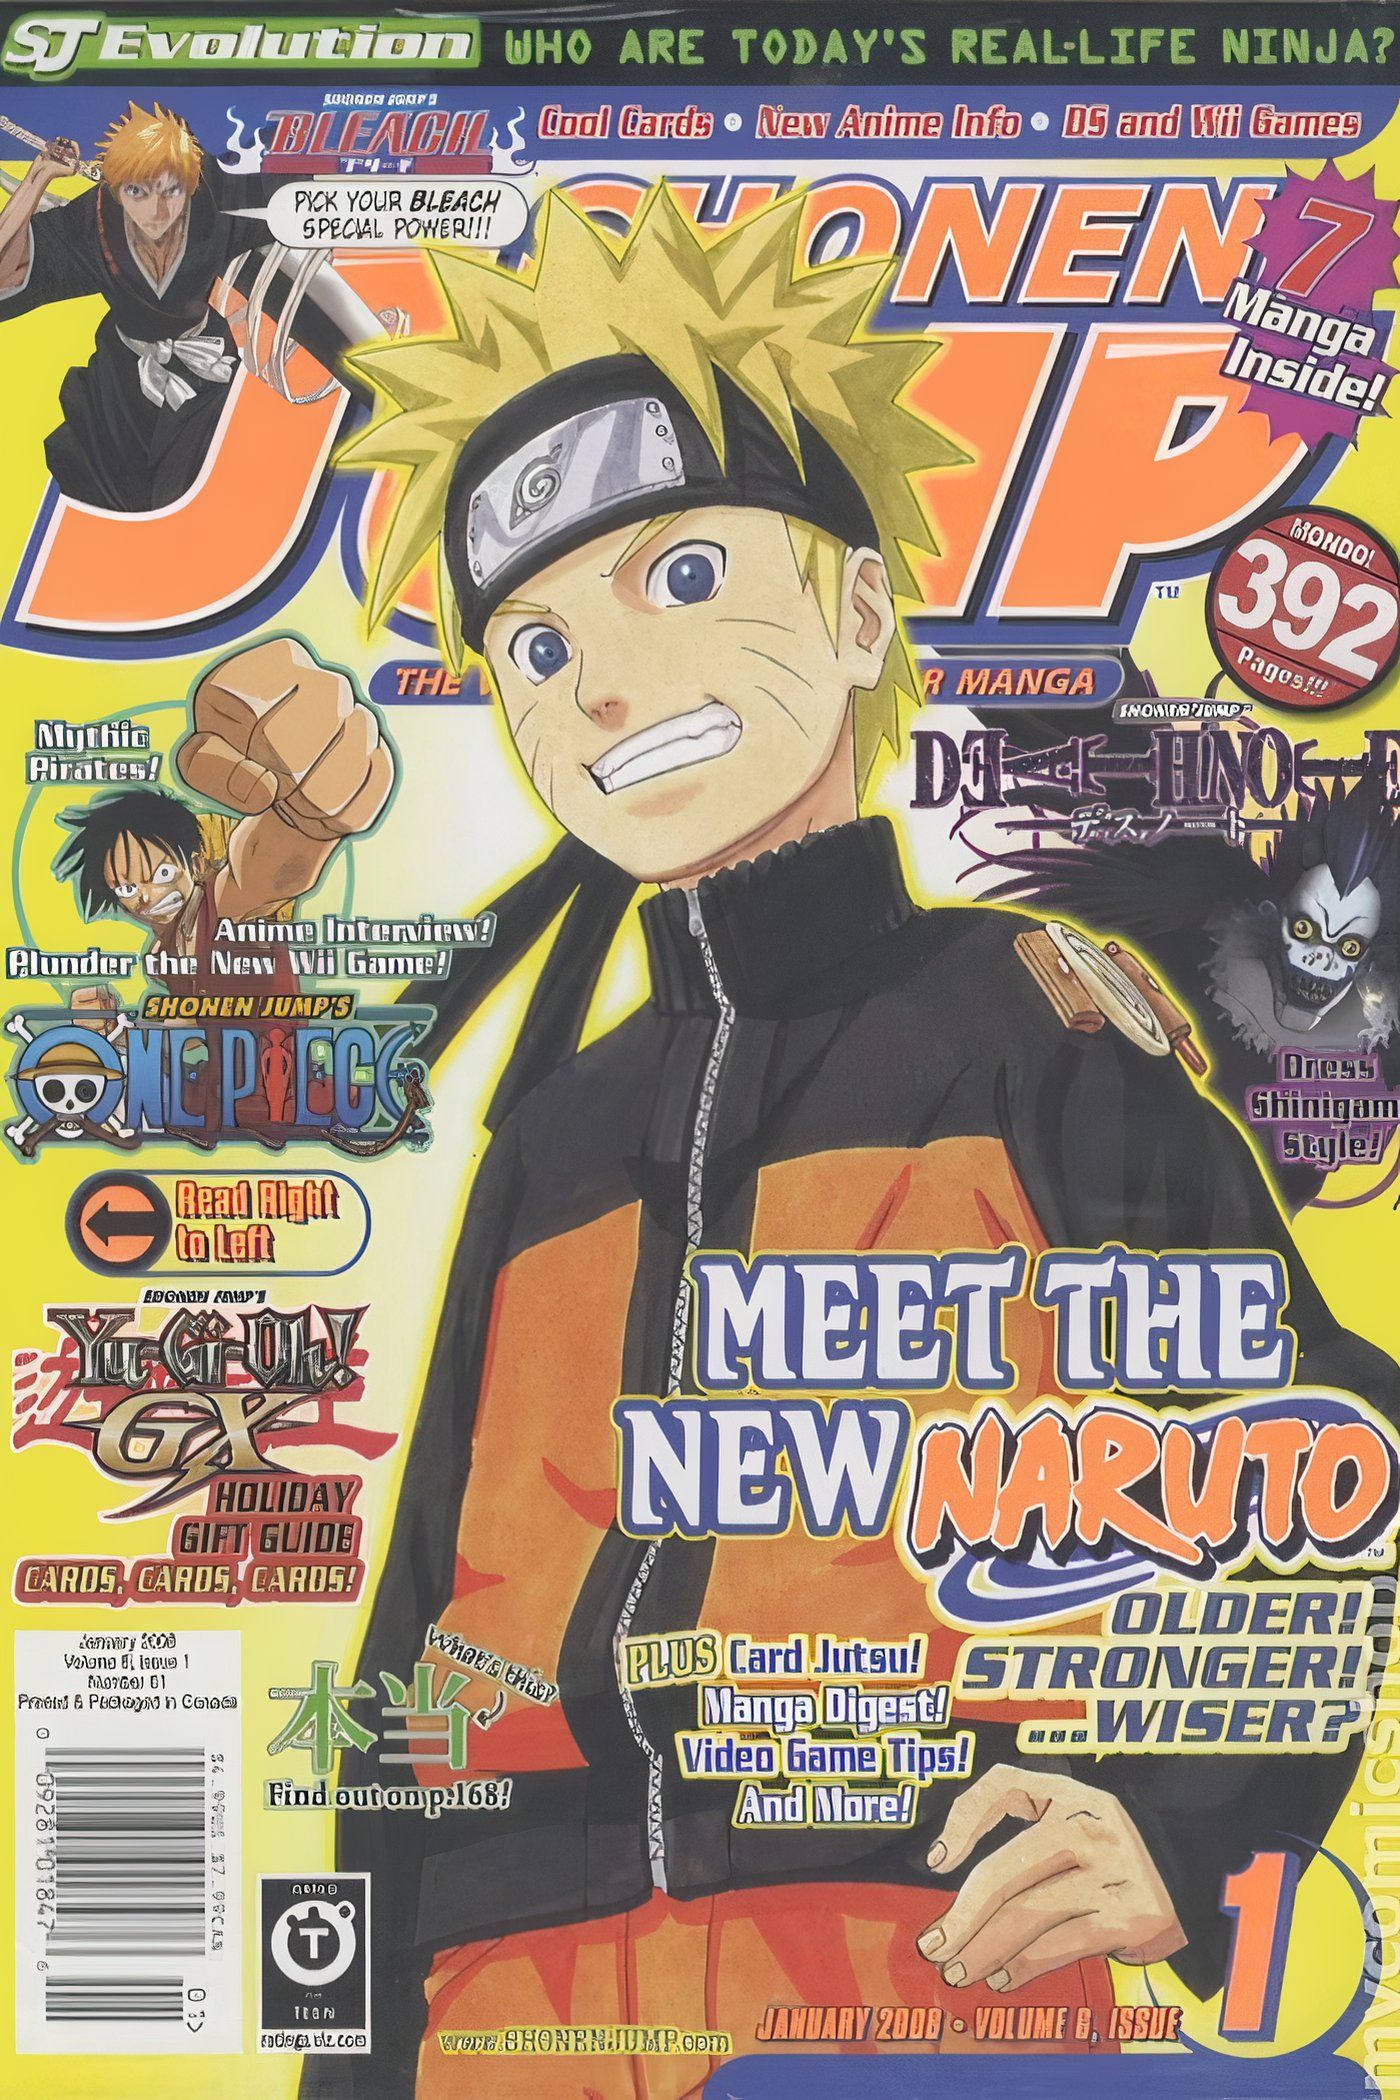 American Weekly Shonen Jump 61 featuring Naruto after the timeskip